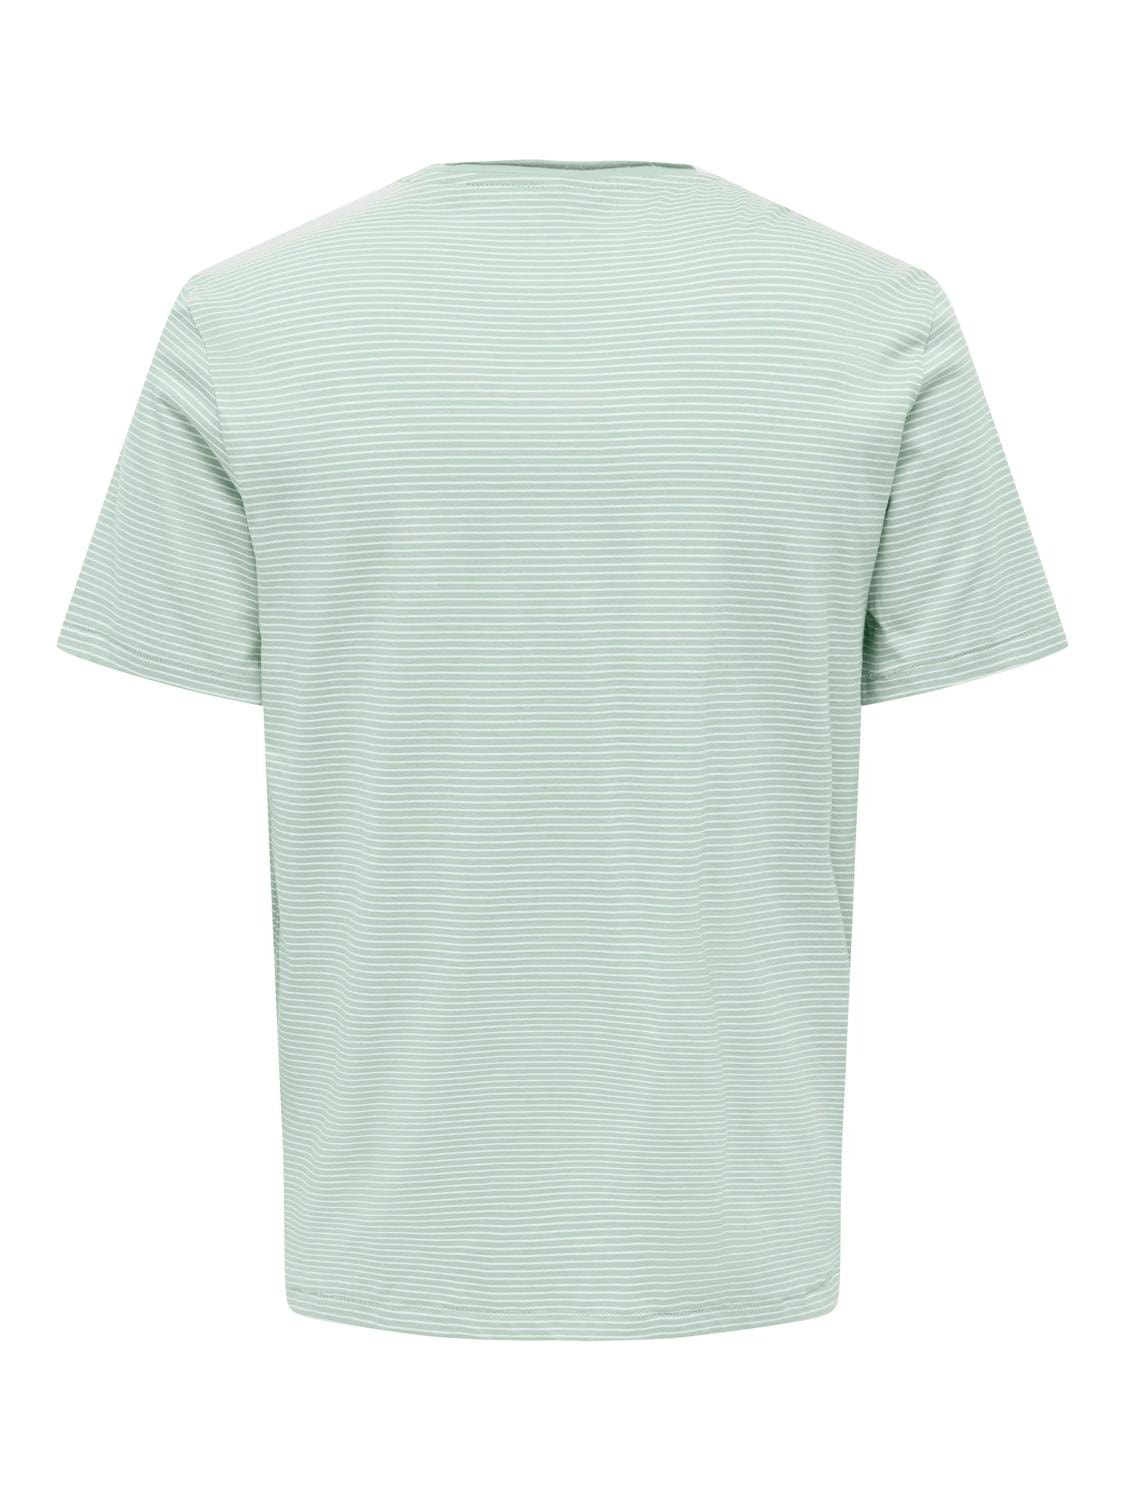 ONLY & SONS Striped o-neck with chest pocket -Surf Spray - 22025680